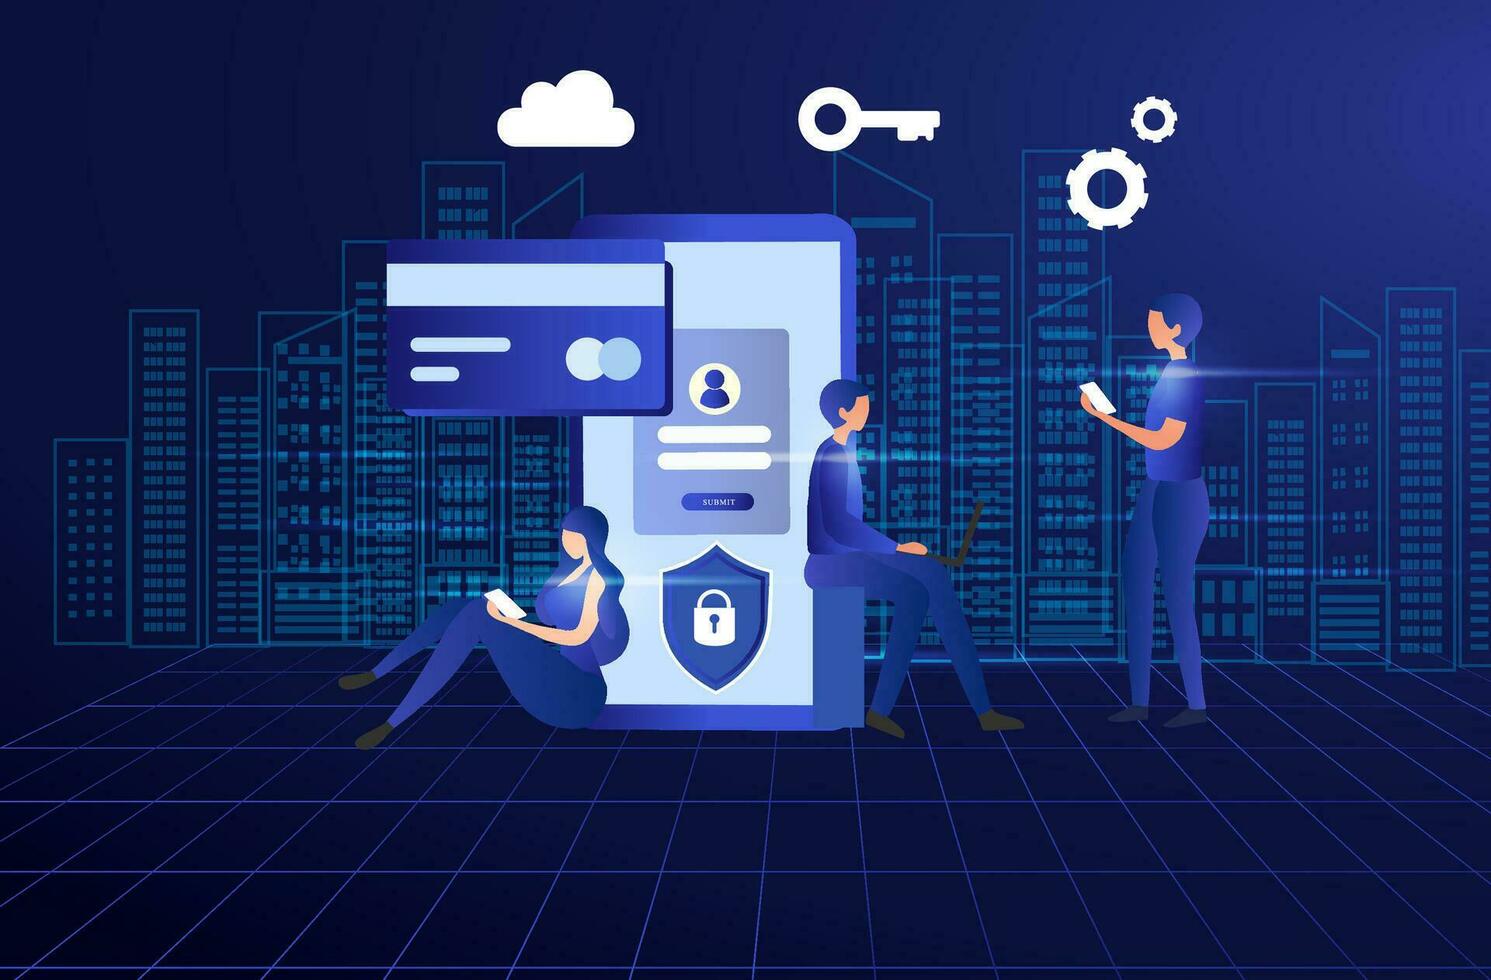 Cyber security and data protection privacy, PDPA concept. Businessman secure data management and protect data from hacker attacks and padlock icon to internet technology networking vector